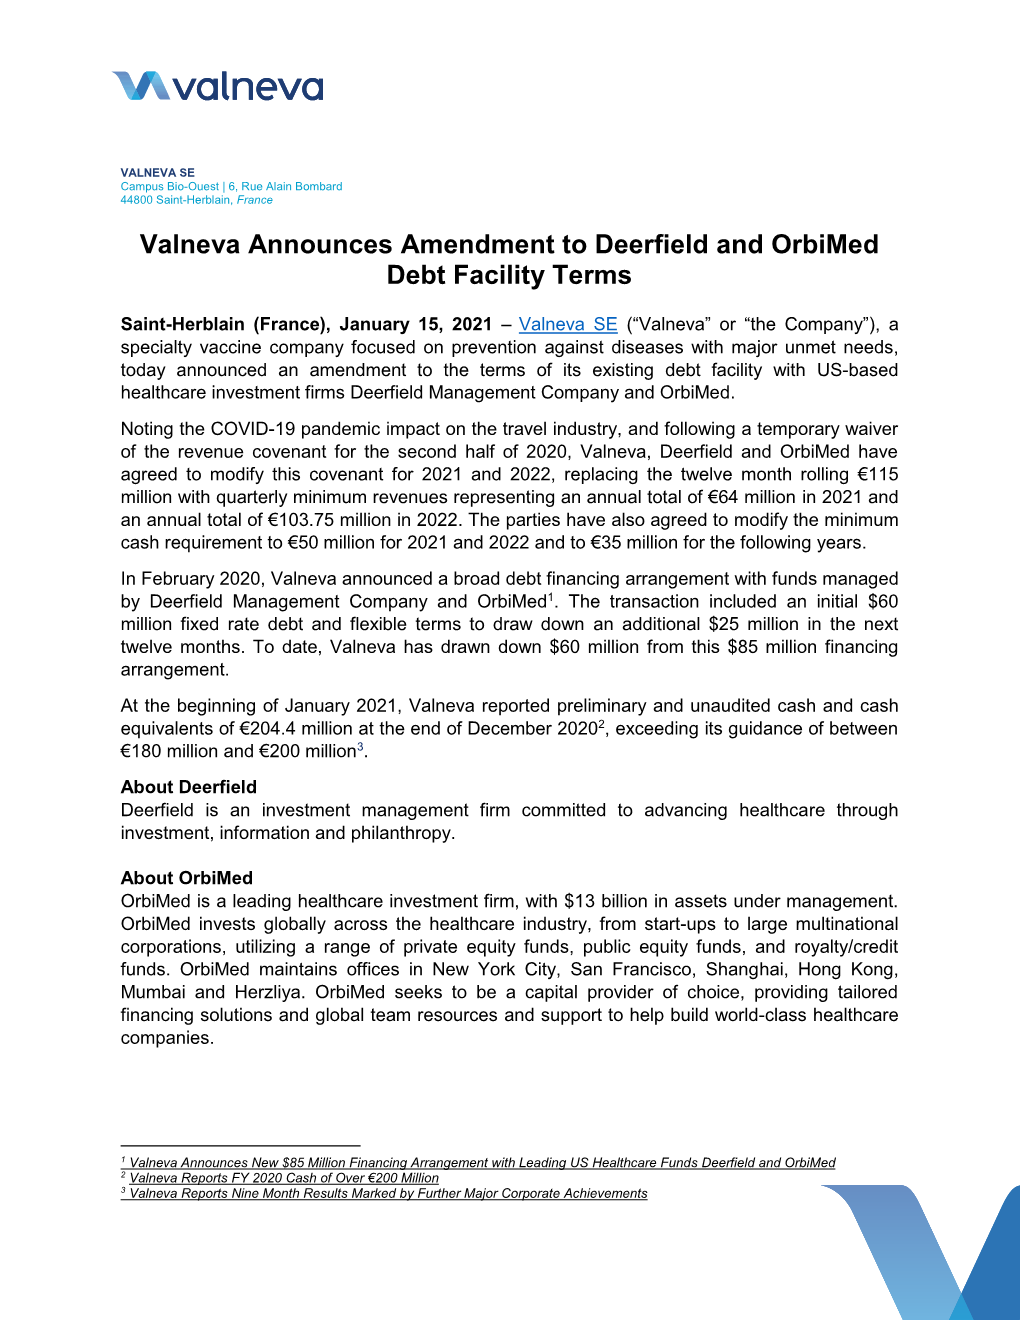 Valneva Announces Amendment to Deerfield and Orbimed Debt Facility Terms